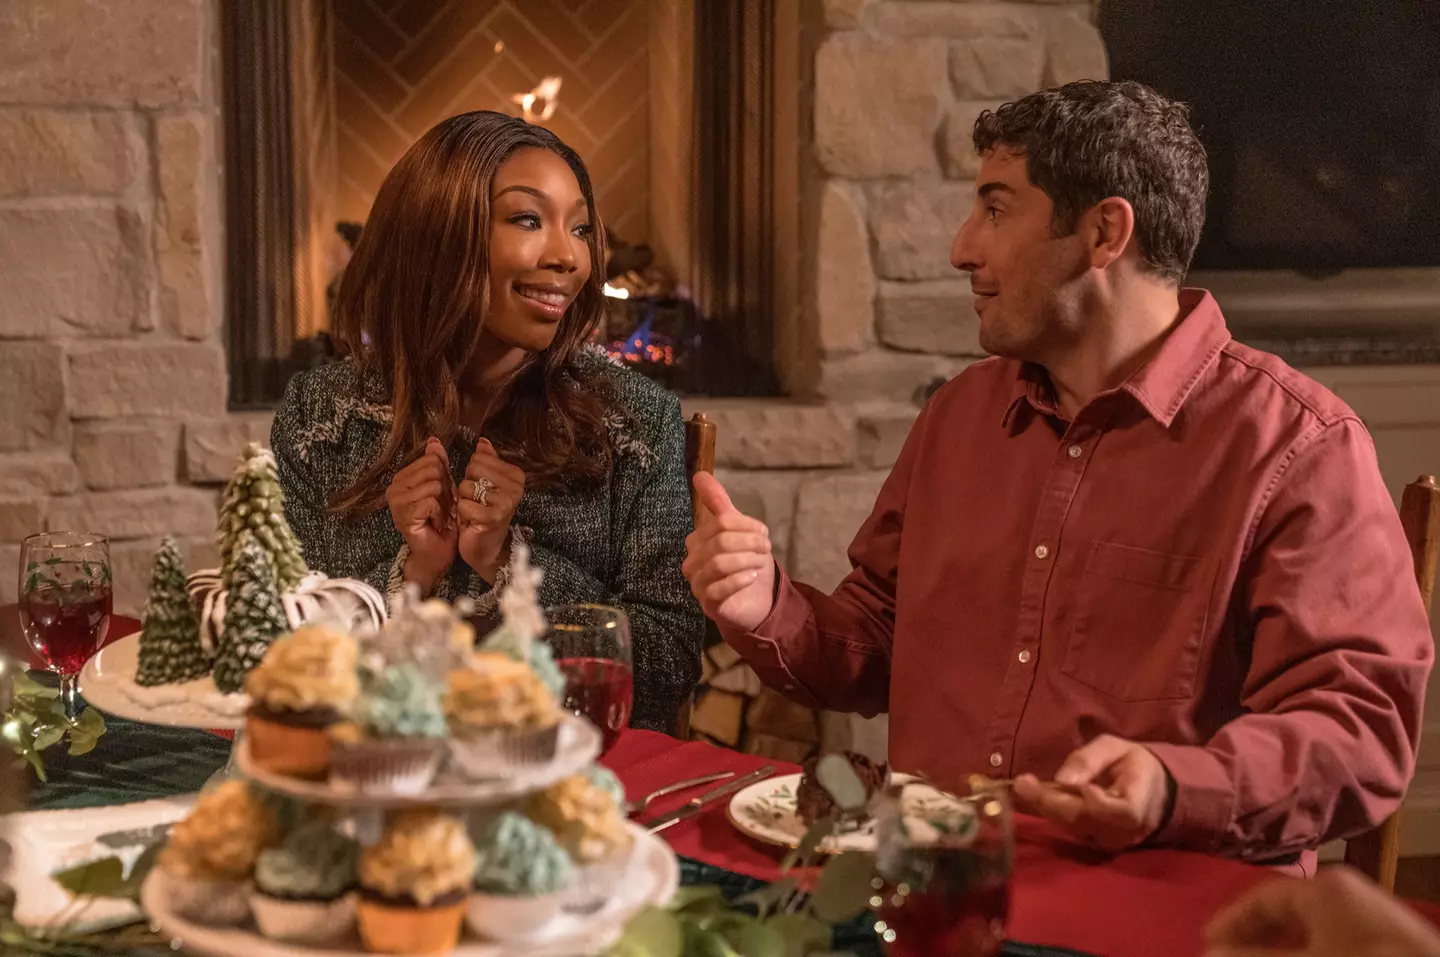 Fans are 'obsessed' with this new Christmas movie.